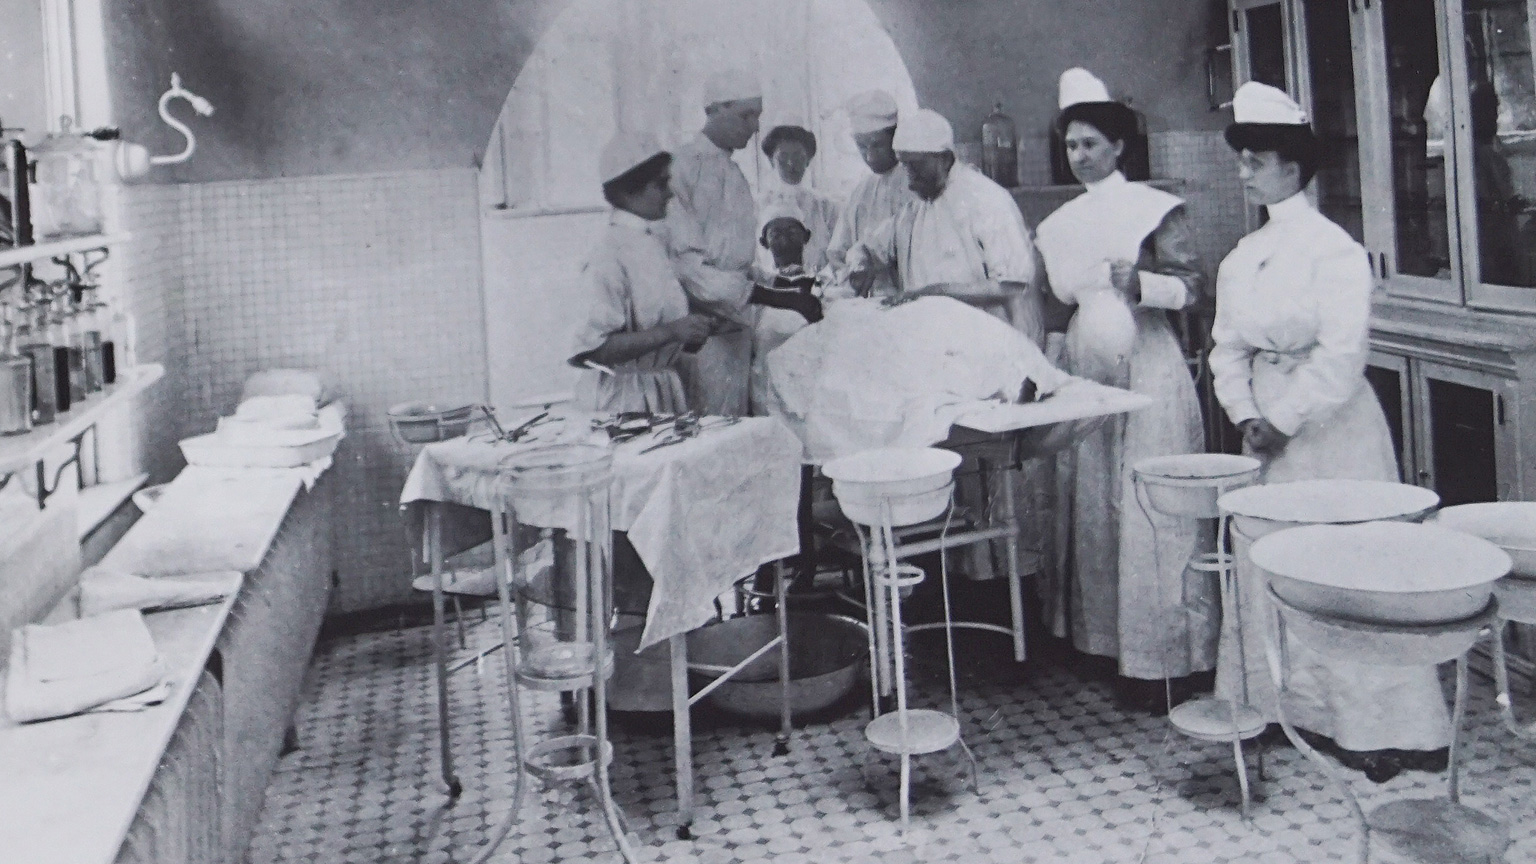 Historical image from Emory Surgery photo archives.